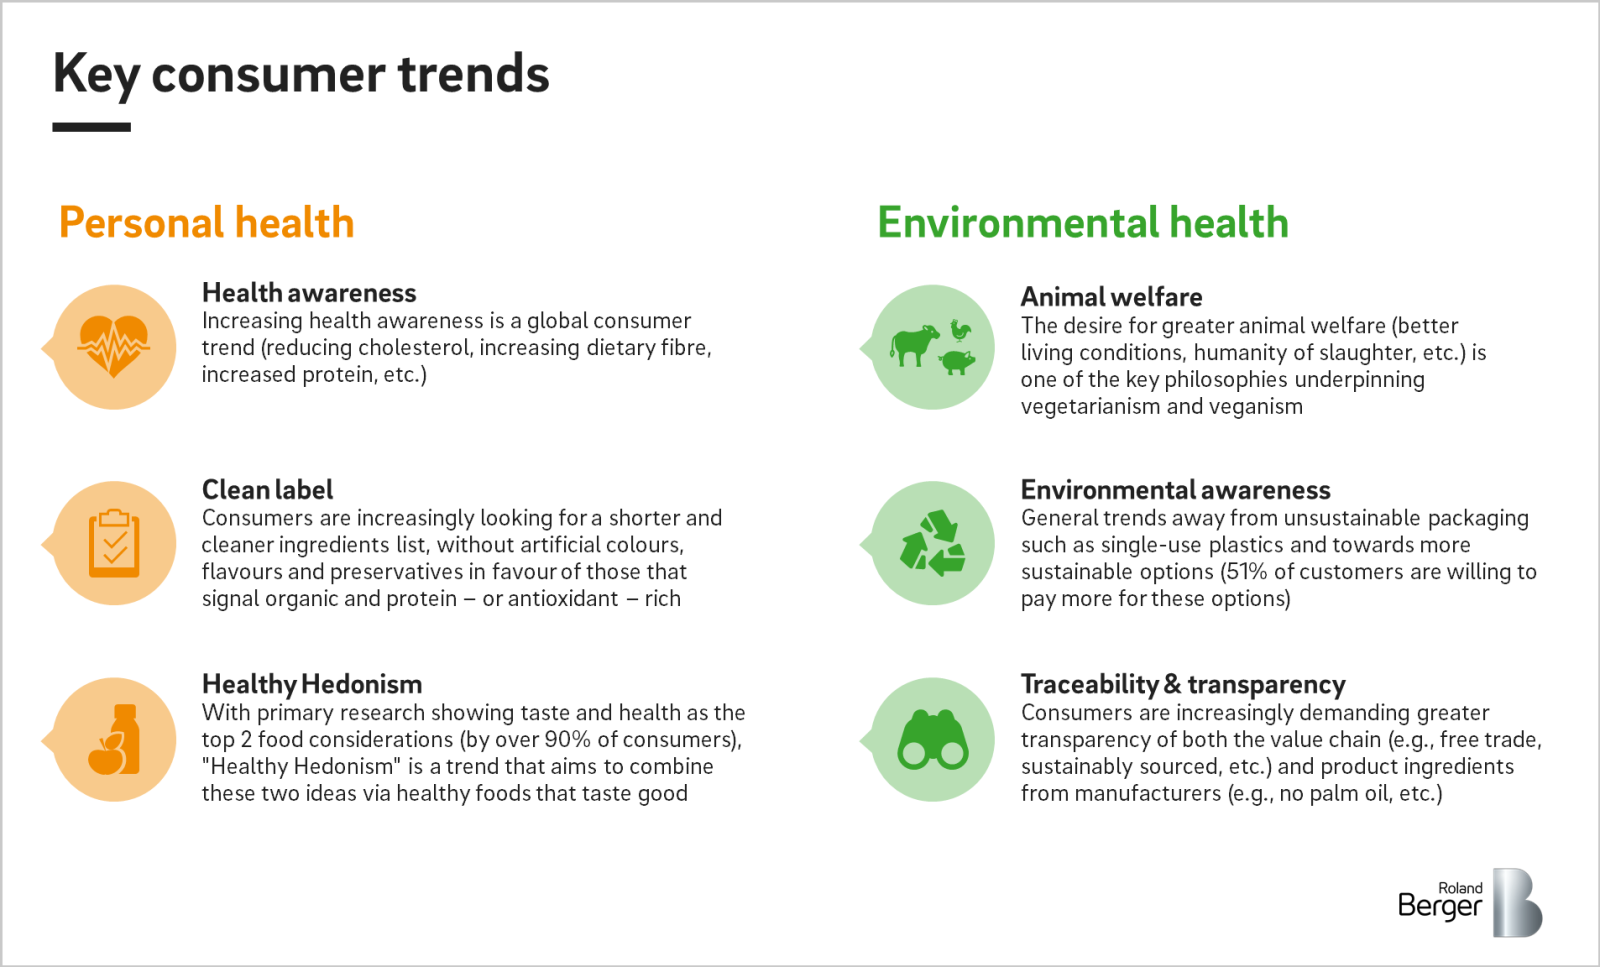 How health and sustainability trends are driving changes in customer